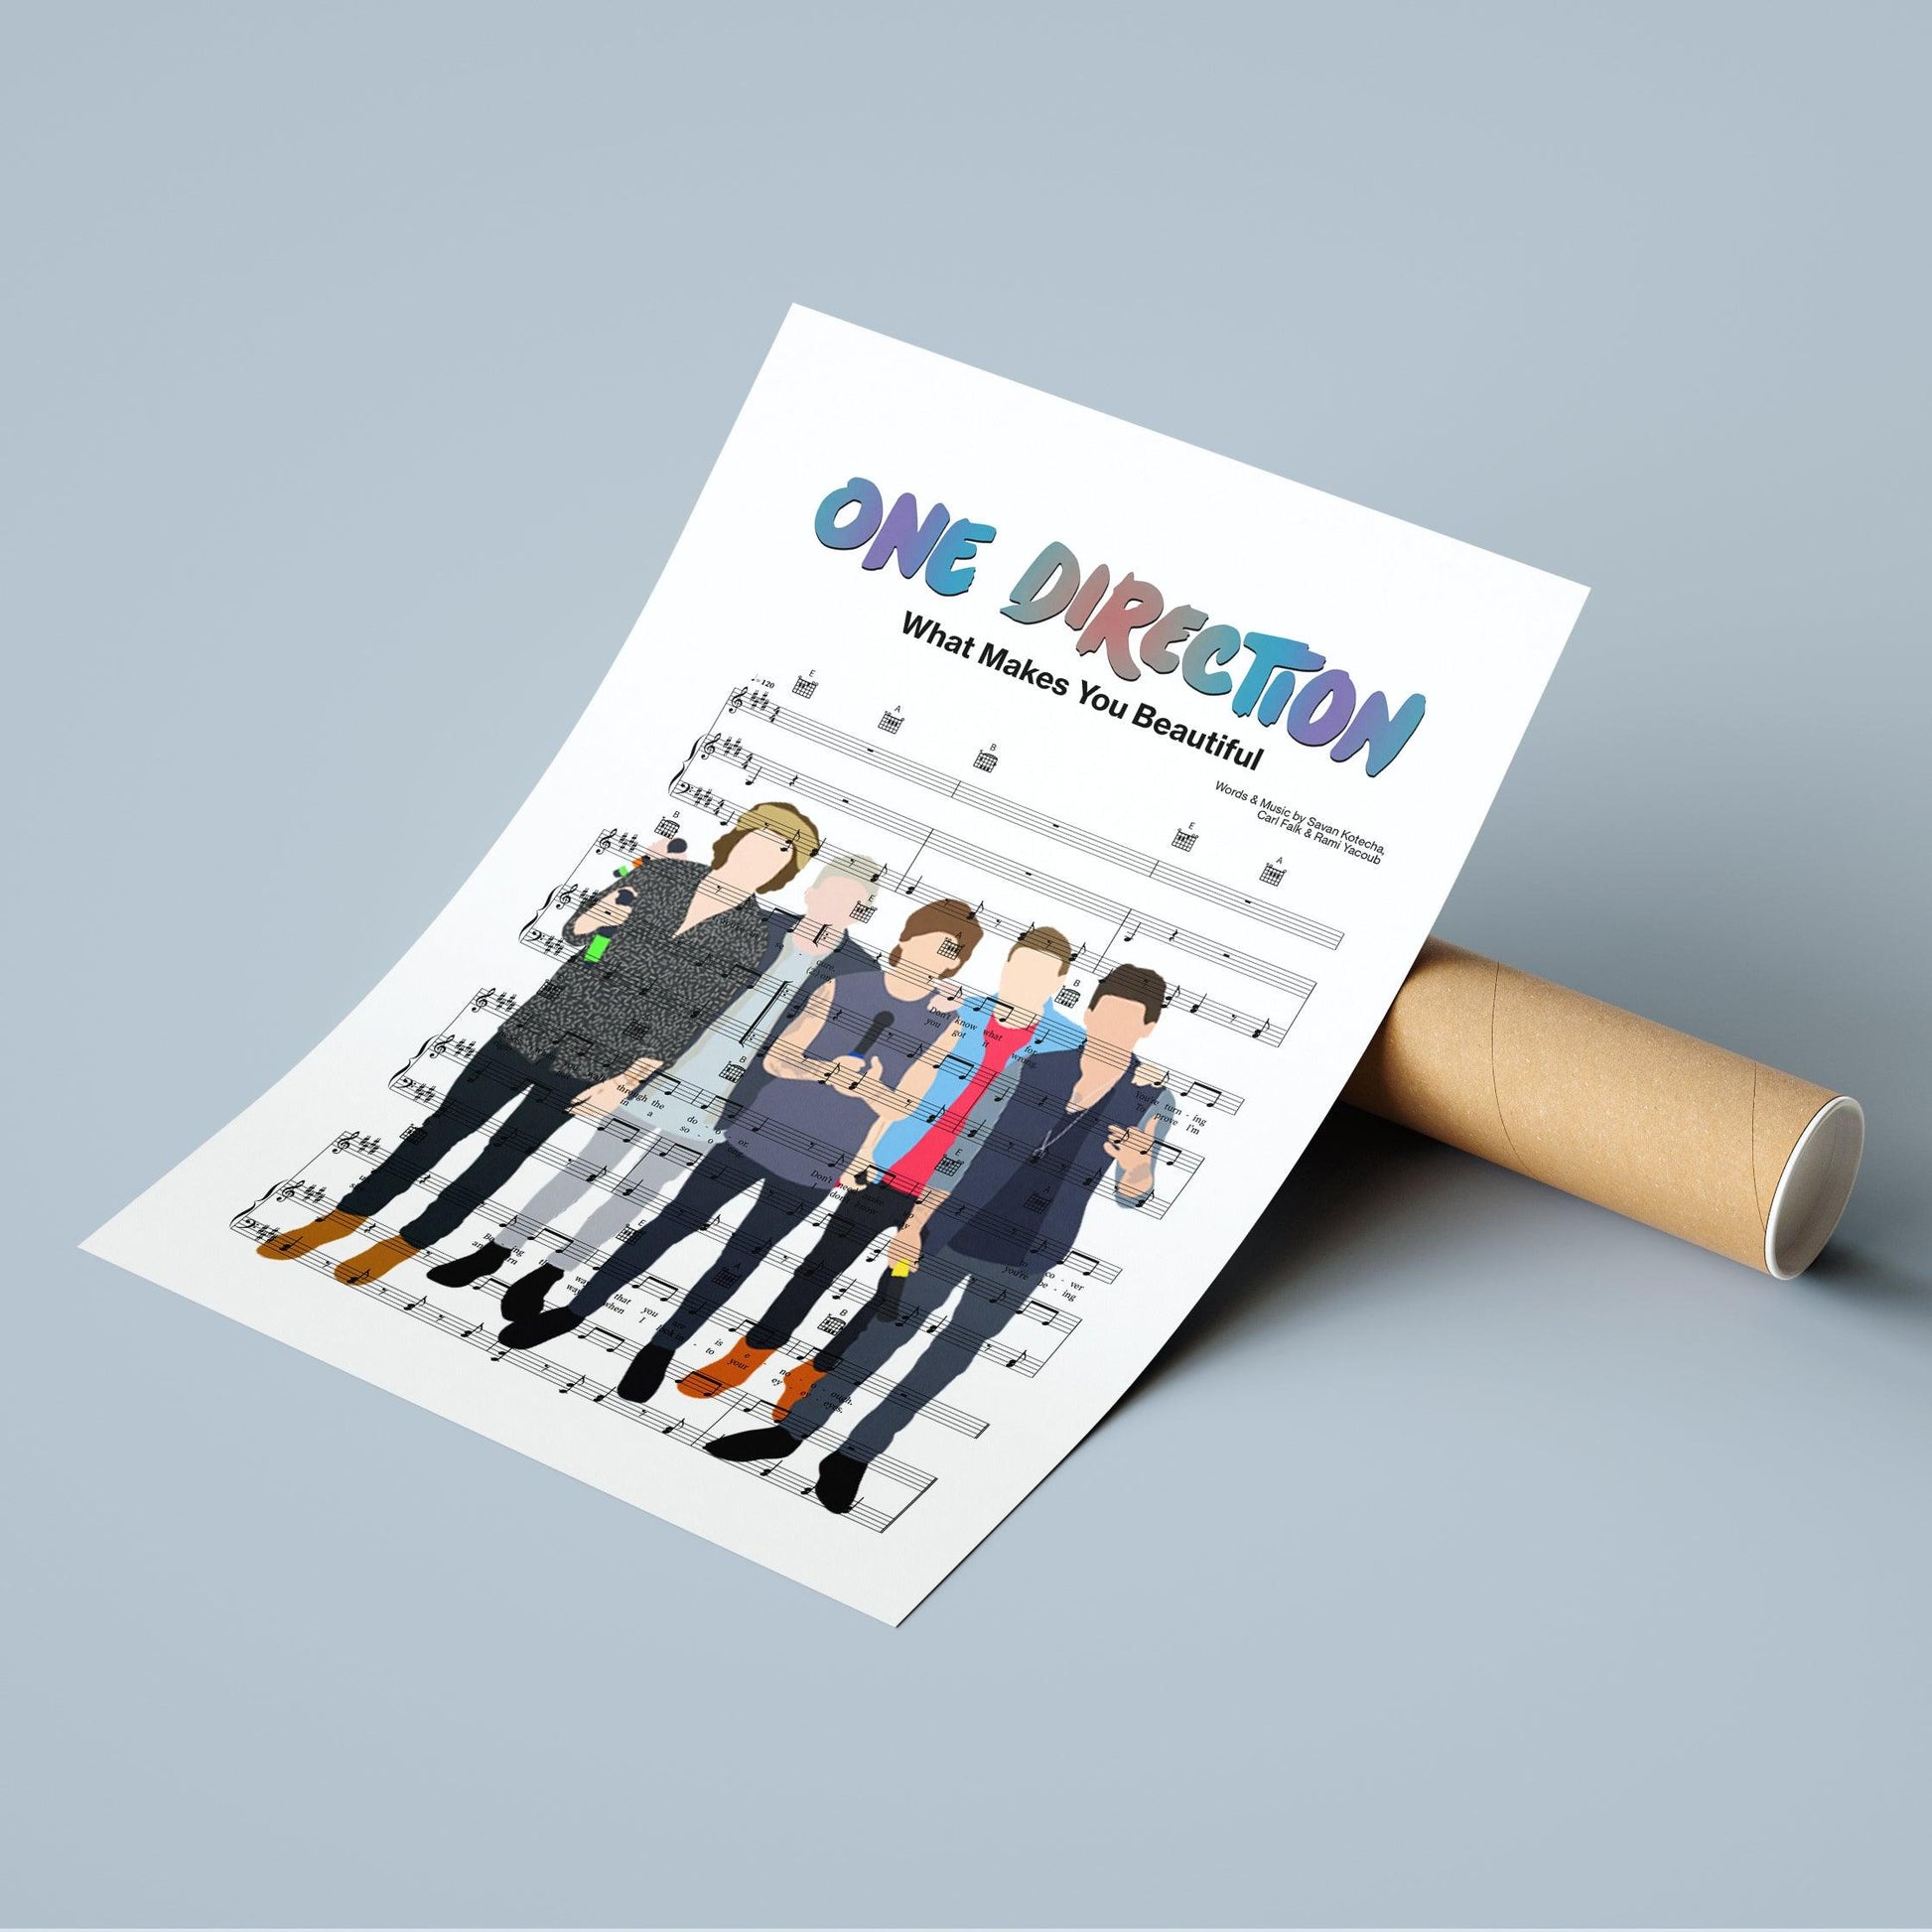 The perfect addition to any room. One Direction is one of the most popular boy bands in the world and this What Makes You Beautiful Poster is a great way to show your love for their music. The simple and elegant design is perfect for any room in your home. Printed on high quality paper, this poster is a great addition to your home décor.